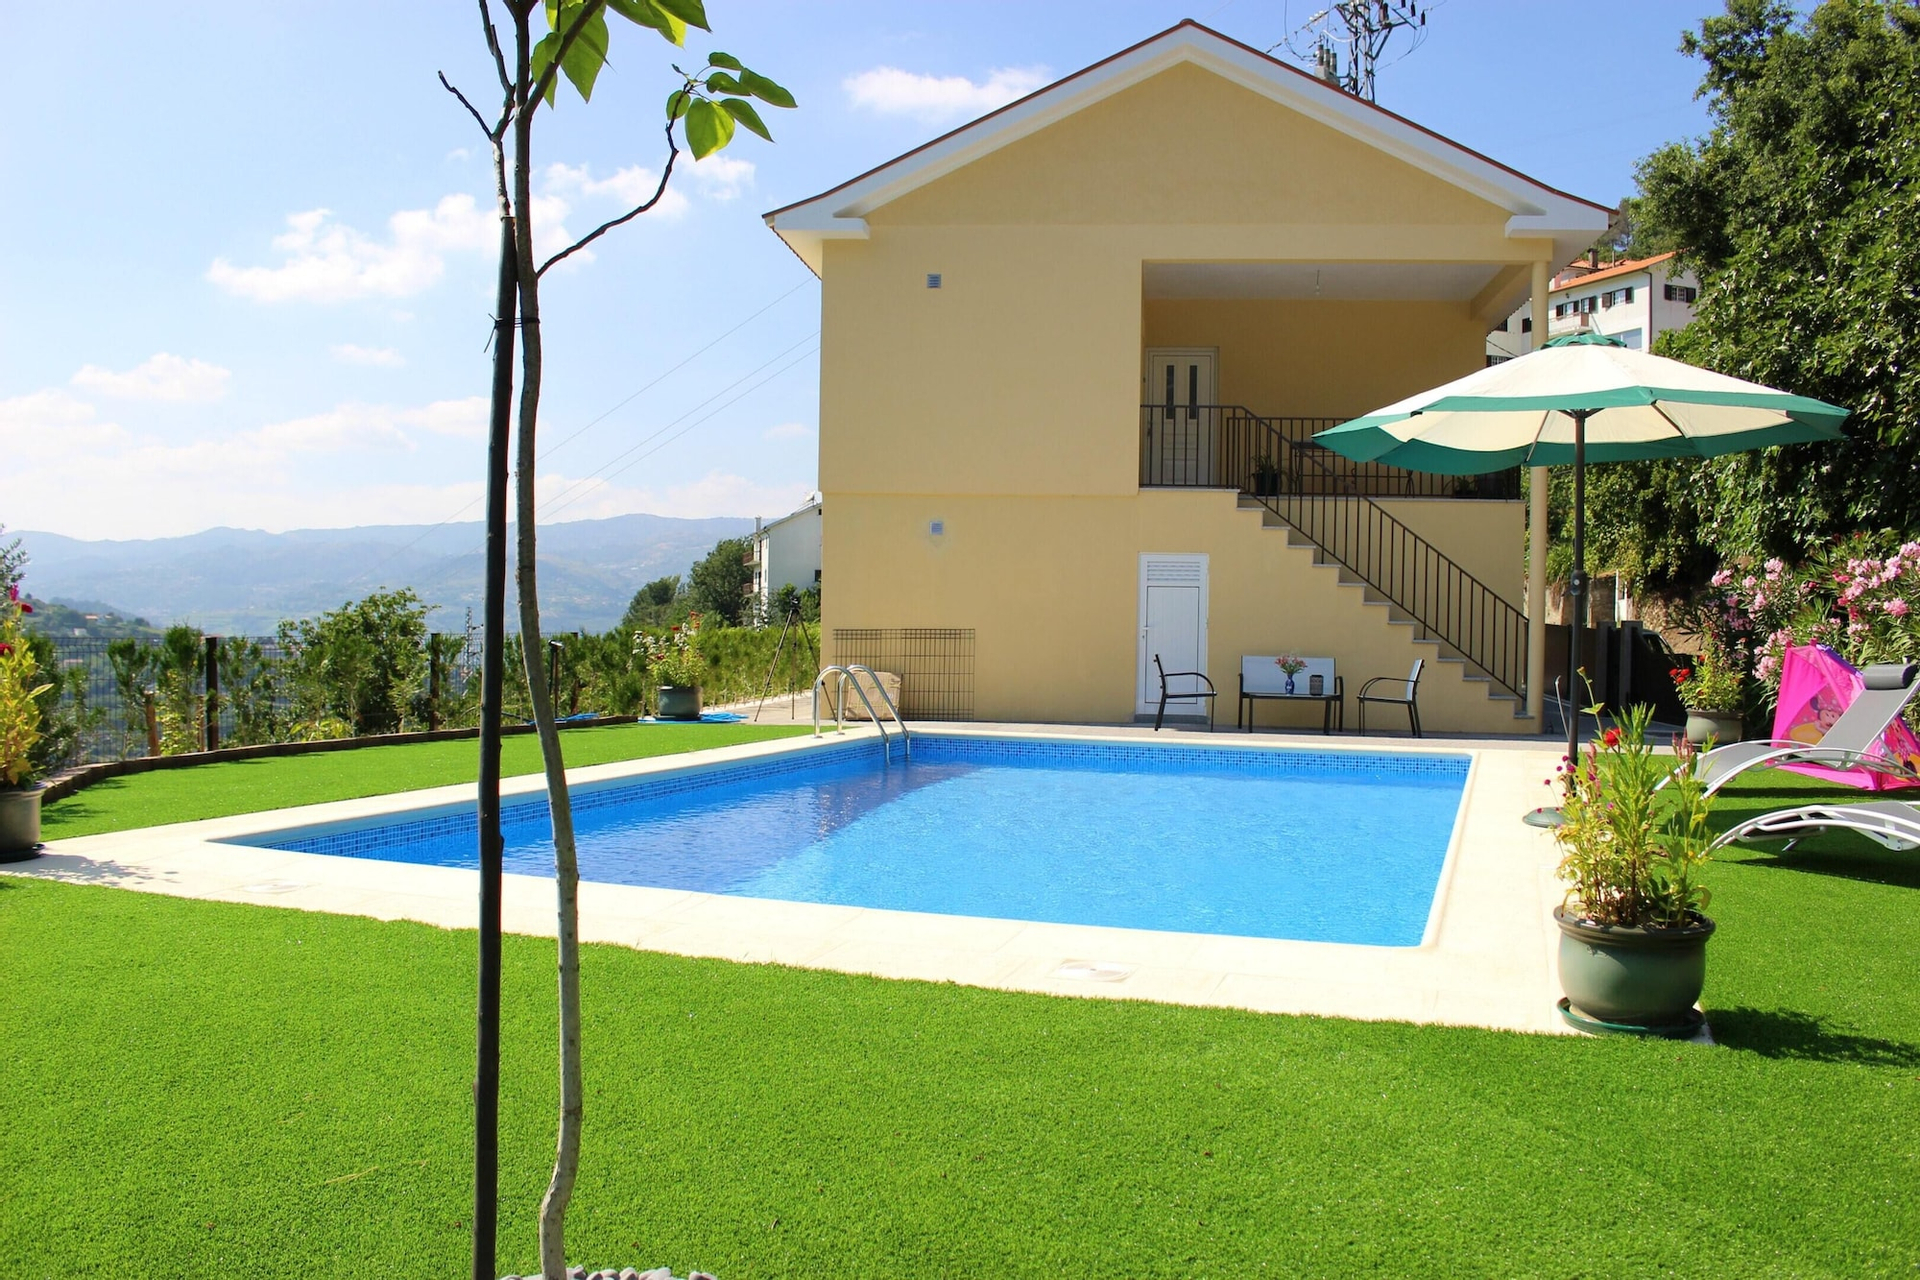 Sport & Beauty, 3 bedrooms villa with private pool furnished garden and wifi at Sao Martinho de Mouros 1 km away fro, Resende